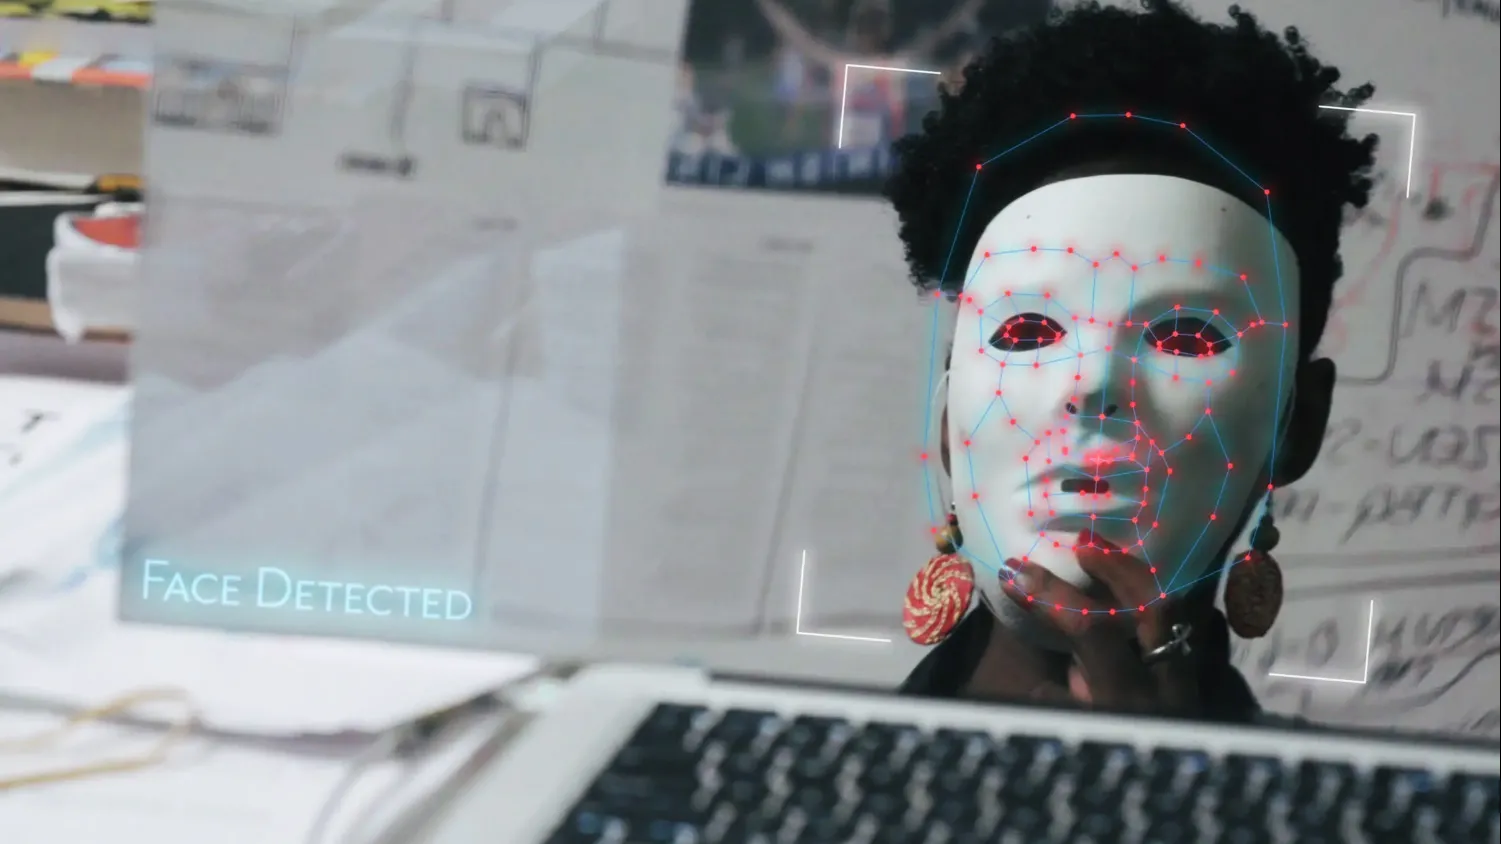 “Coded Bias,” the award-winning documentary examining artificial intelligence and how such tools still reflect racial and gender biases of their creators and society, will be presented by the university’s Extended Reality for Learning (xREAL) Lab.